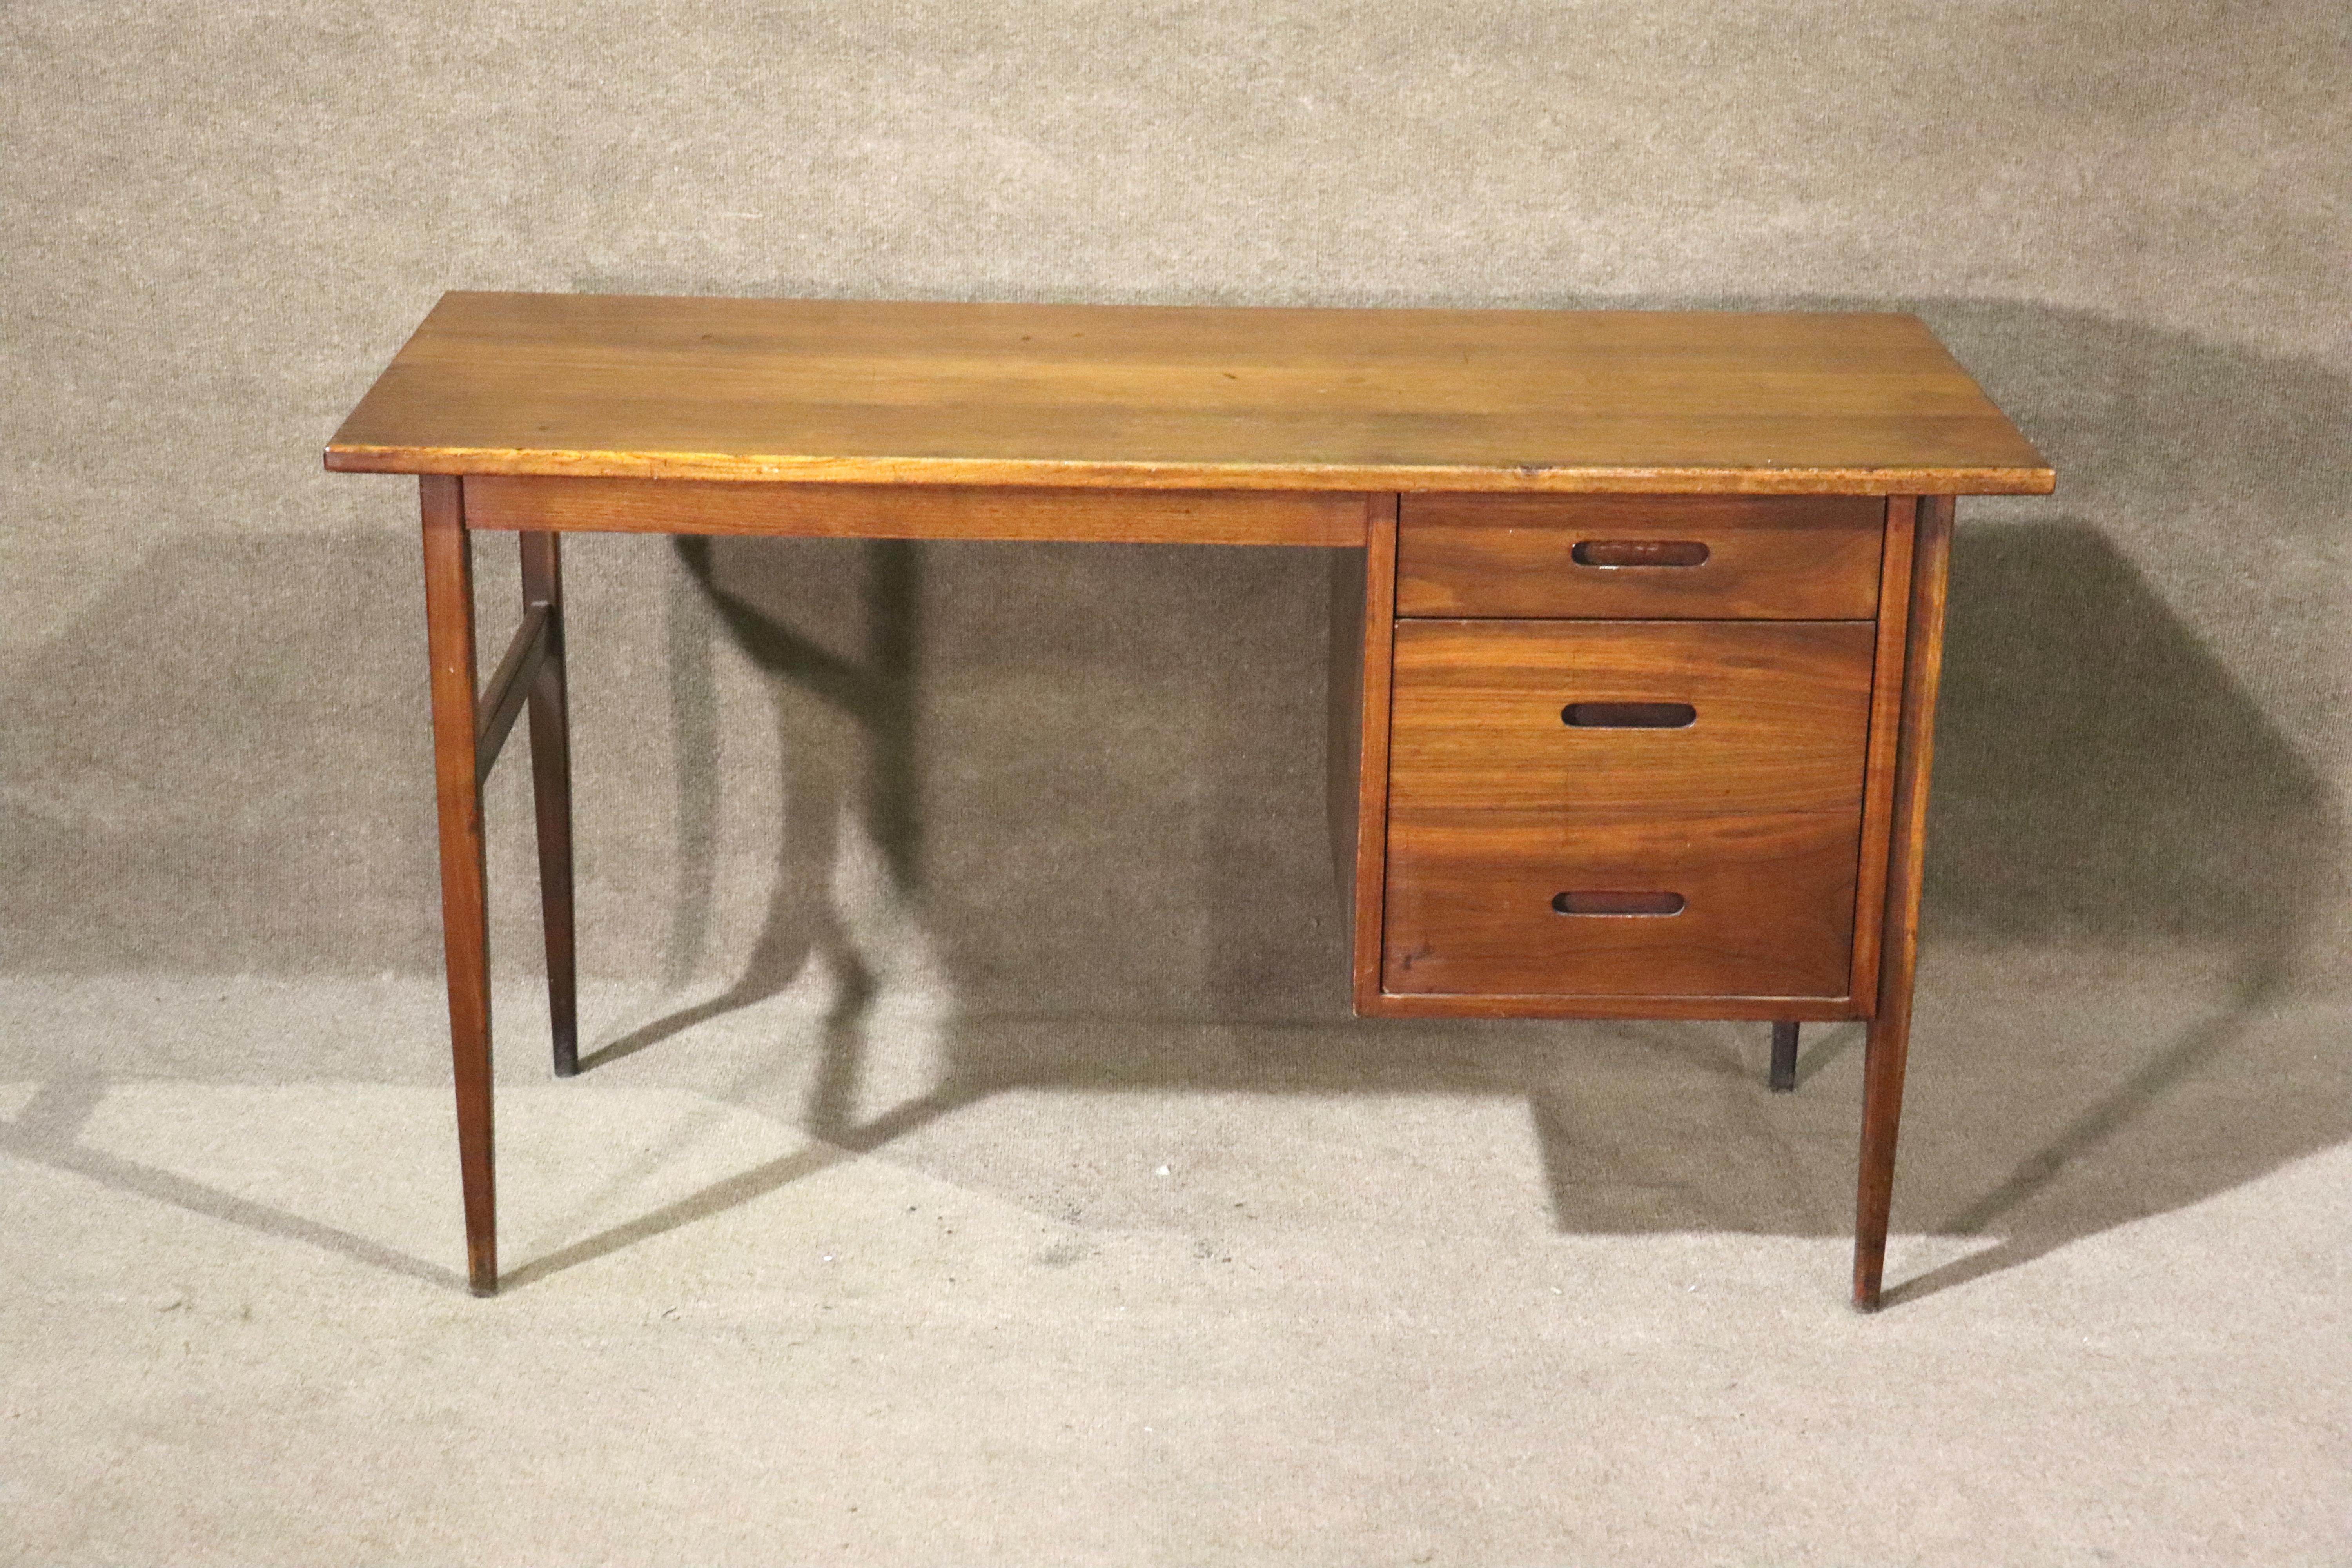 Mid-century modern writing desk in teak wood. Simple design with a two drawer bank and tapered legs.
Please confirm location NY or NJ